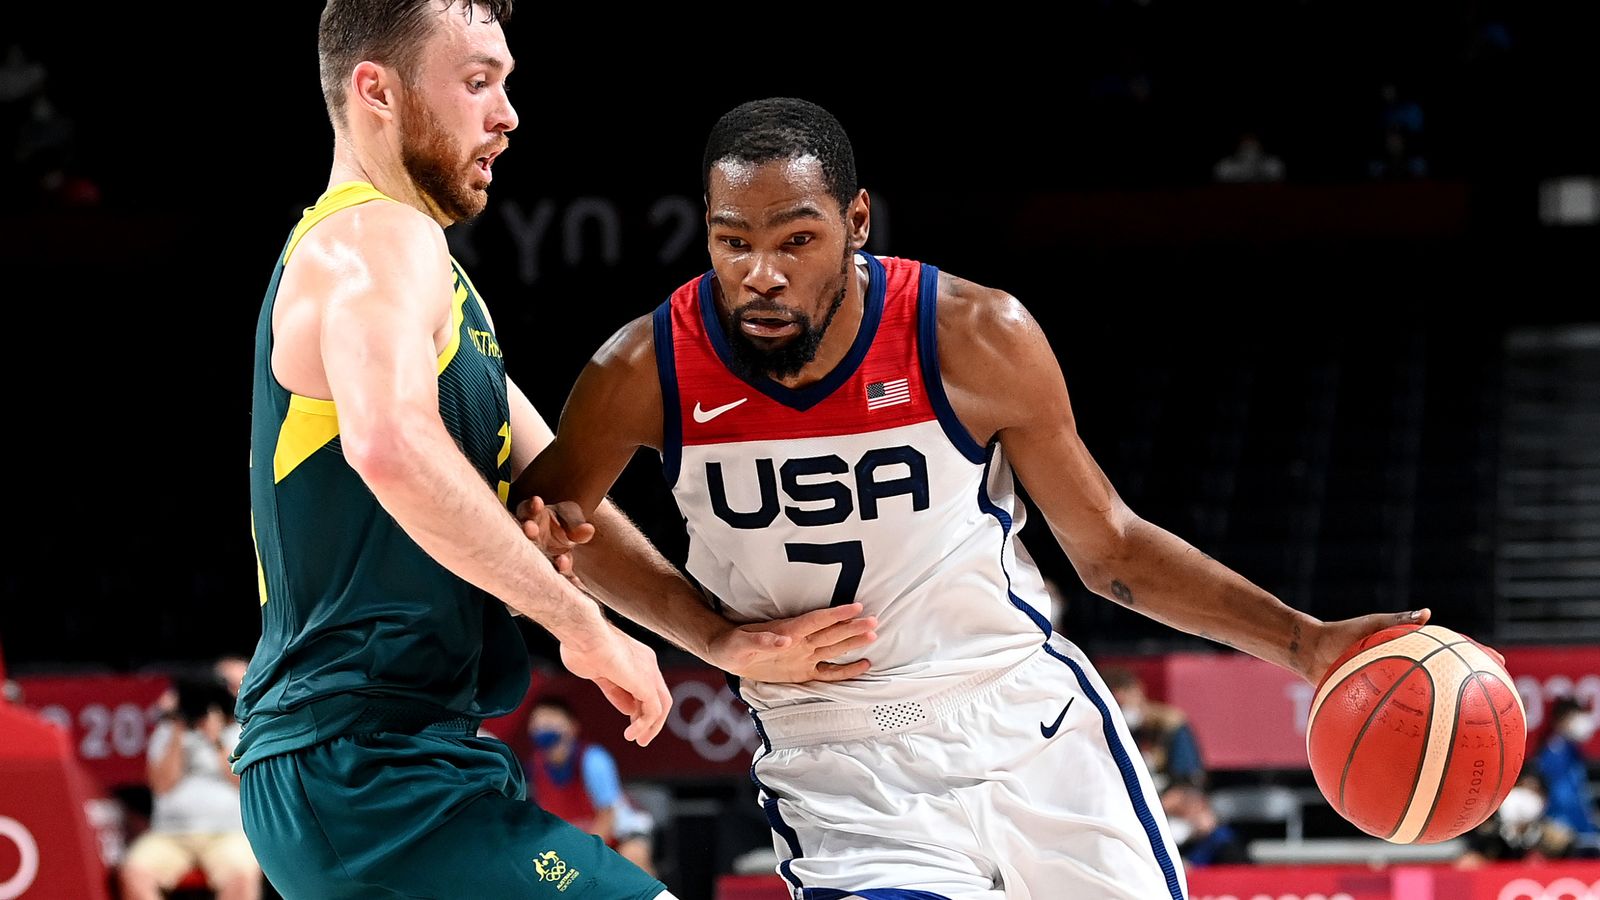 Kevin Durant inspires comeback as Team USA rally past Australia to reach gold medal game